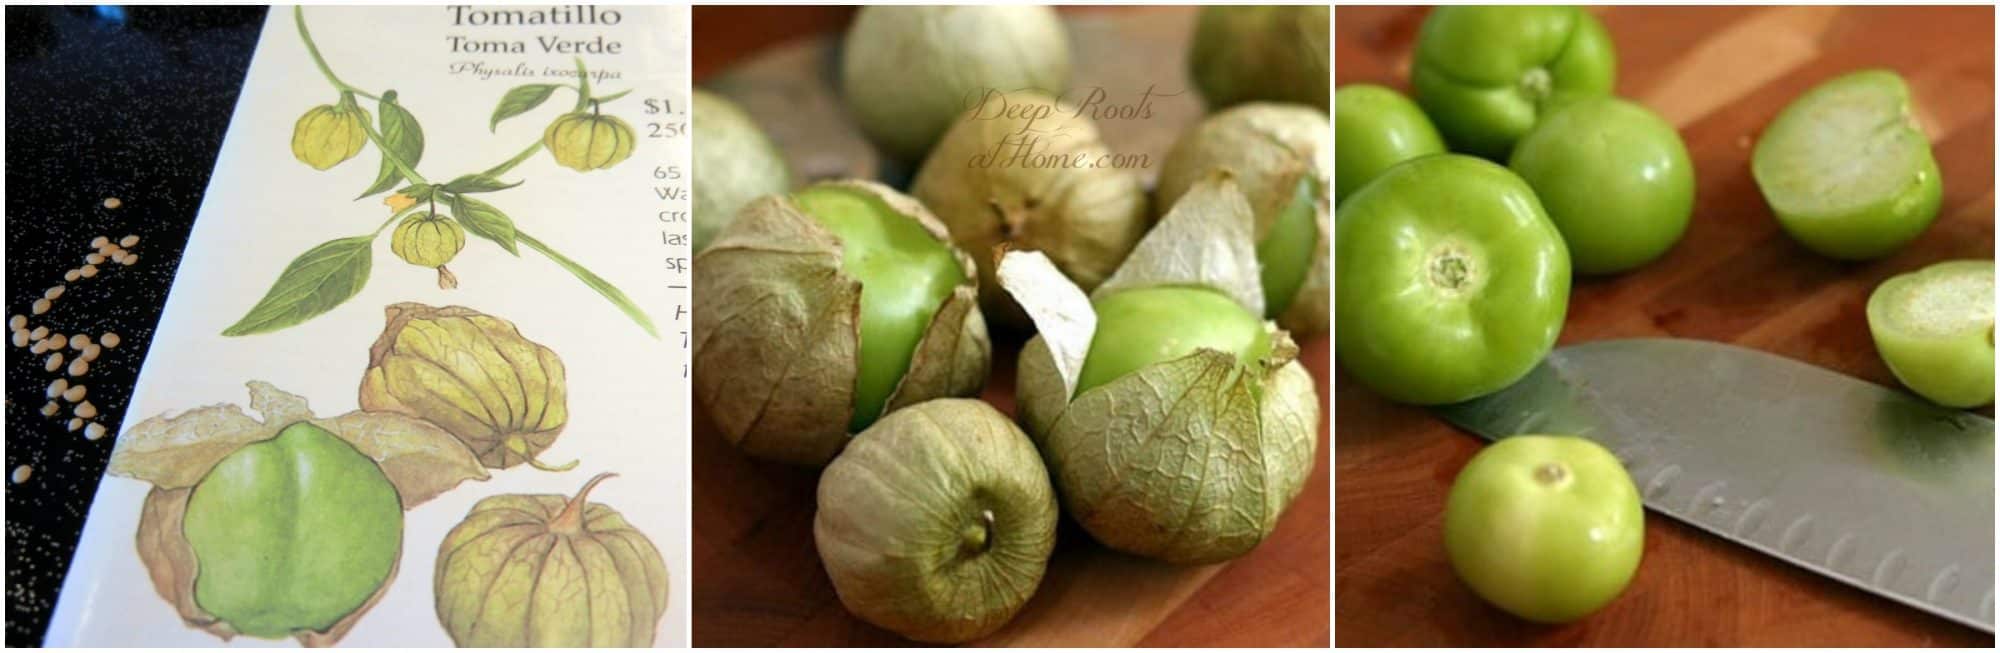 Fire or Oven Roasted Tomatillos Perfect this Salsa Verde Recipe. small green fruit in husks off the plant